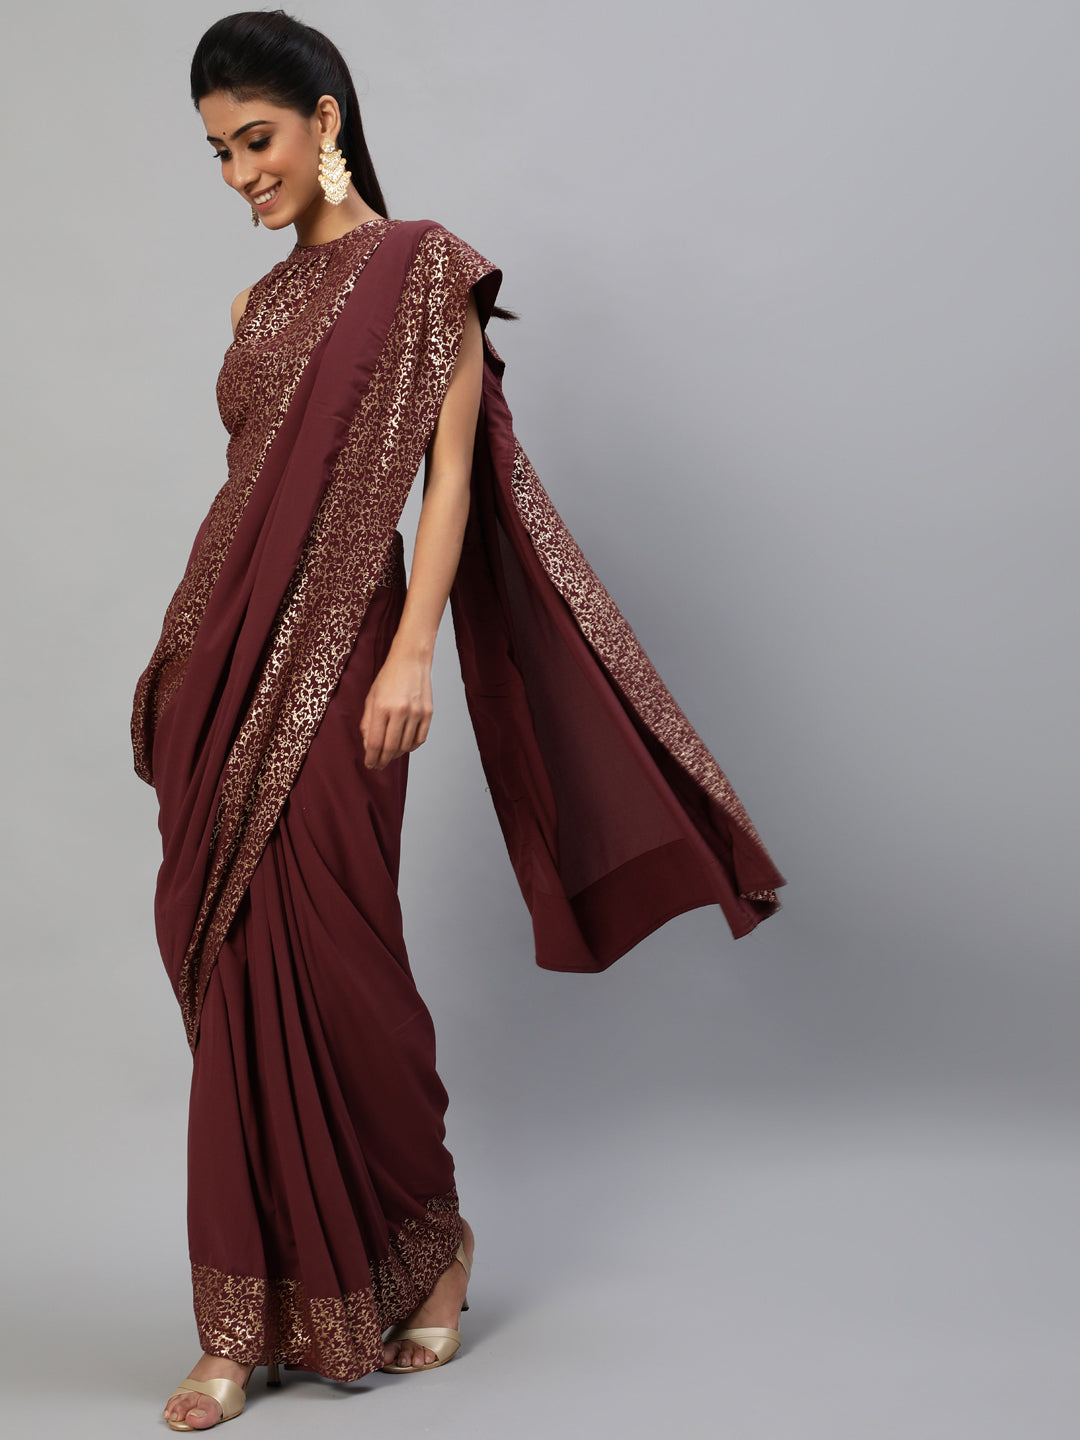 Women's Burgundy Foil Printed Saree With Blouse - Aks